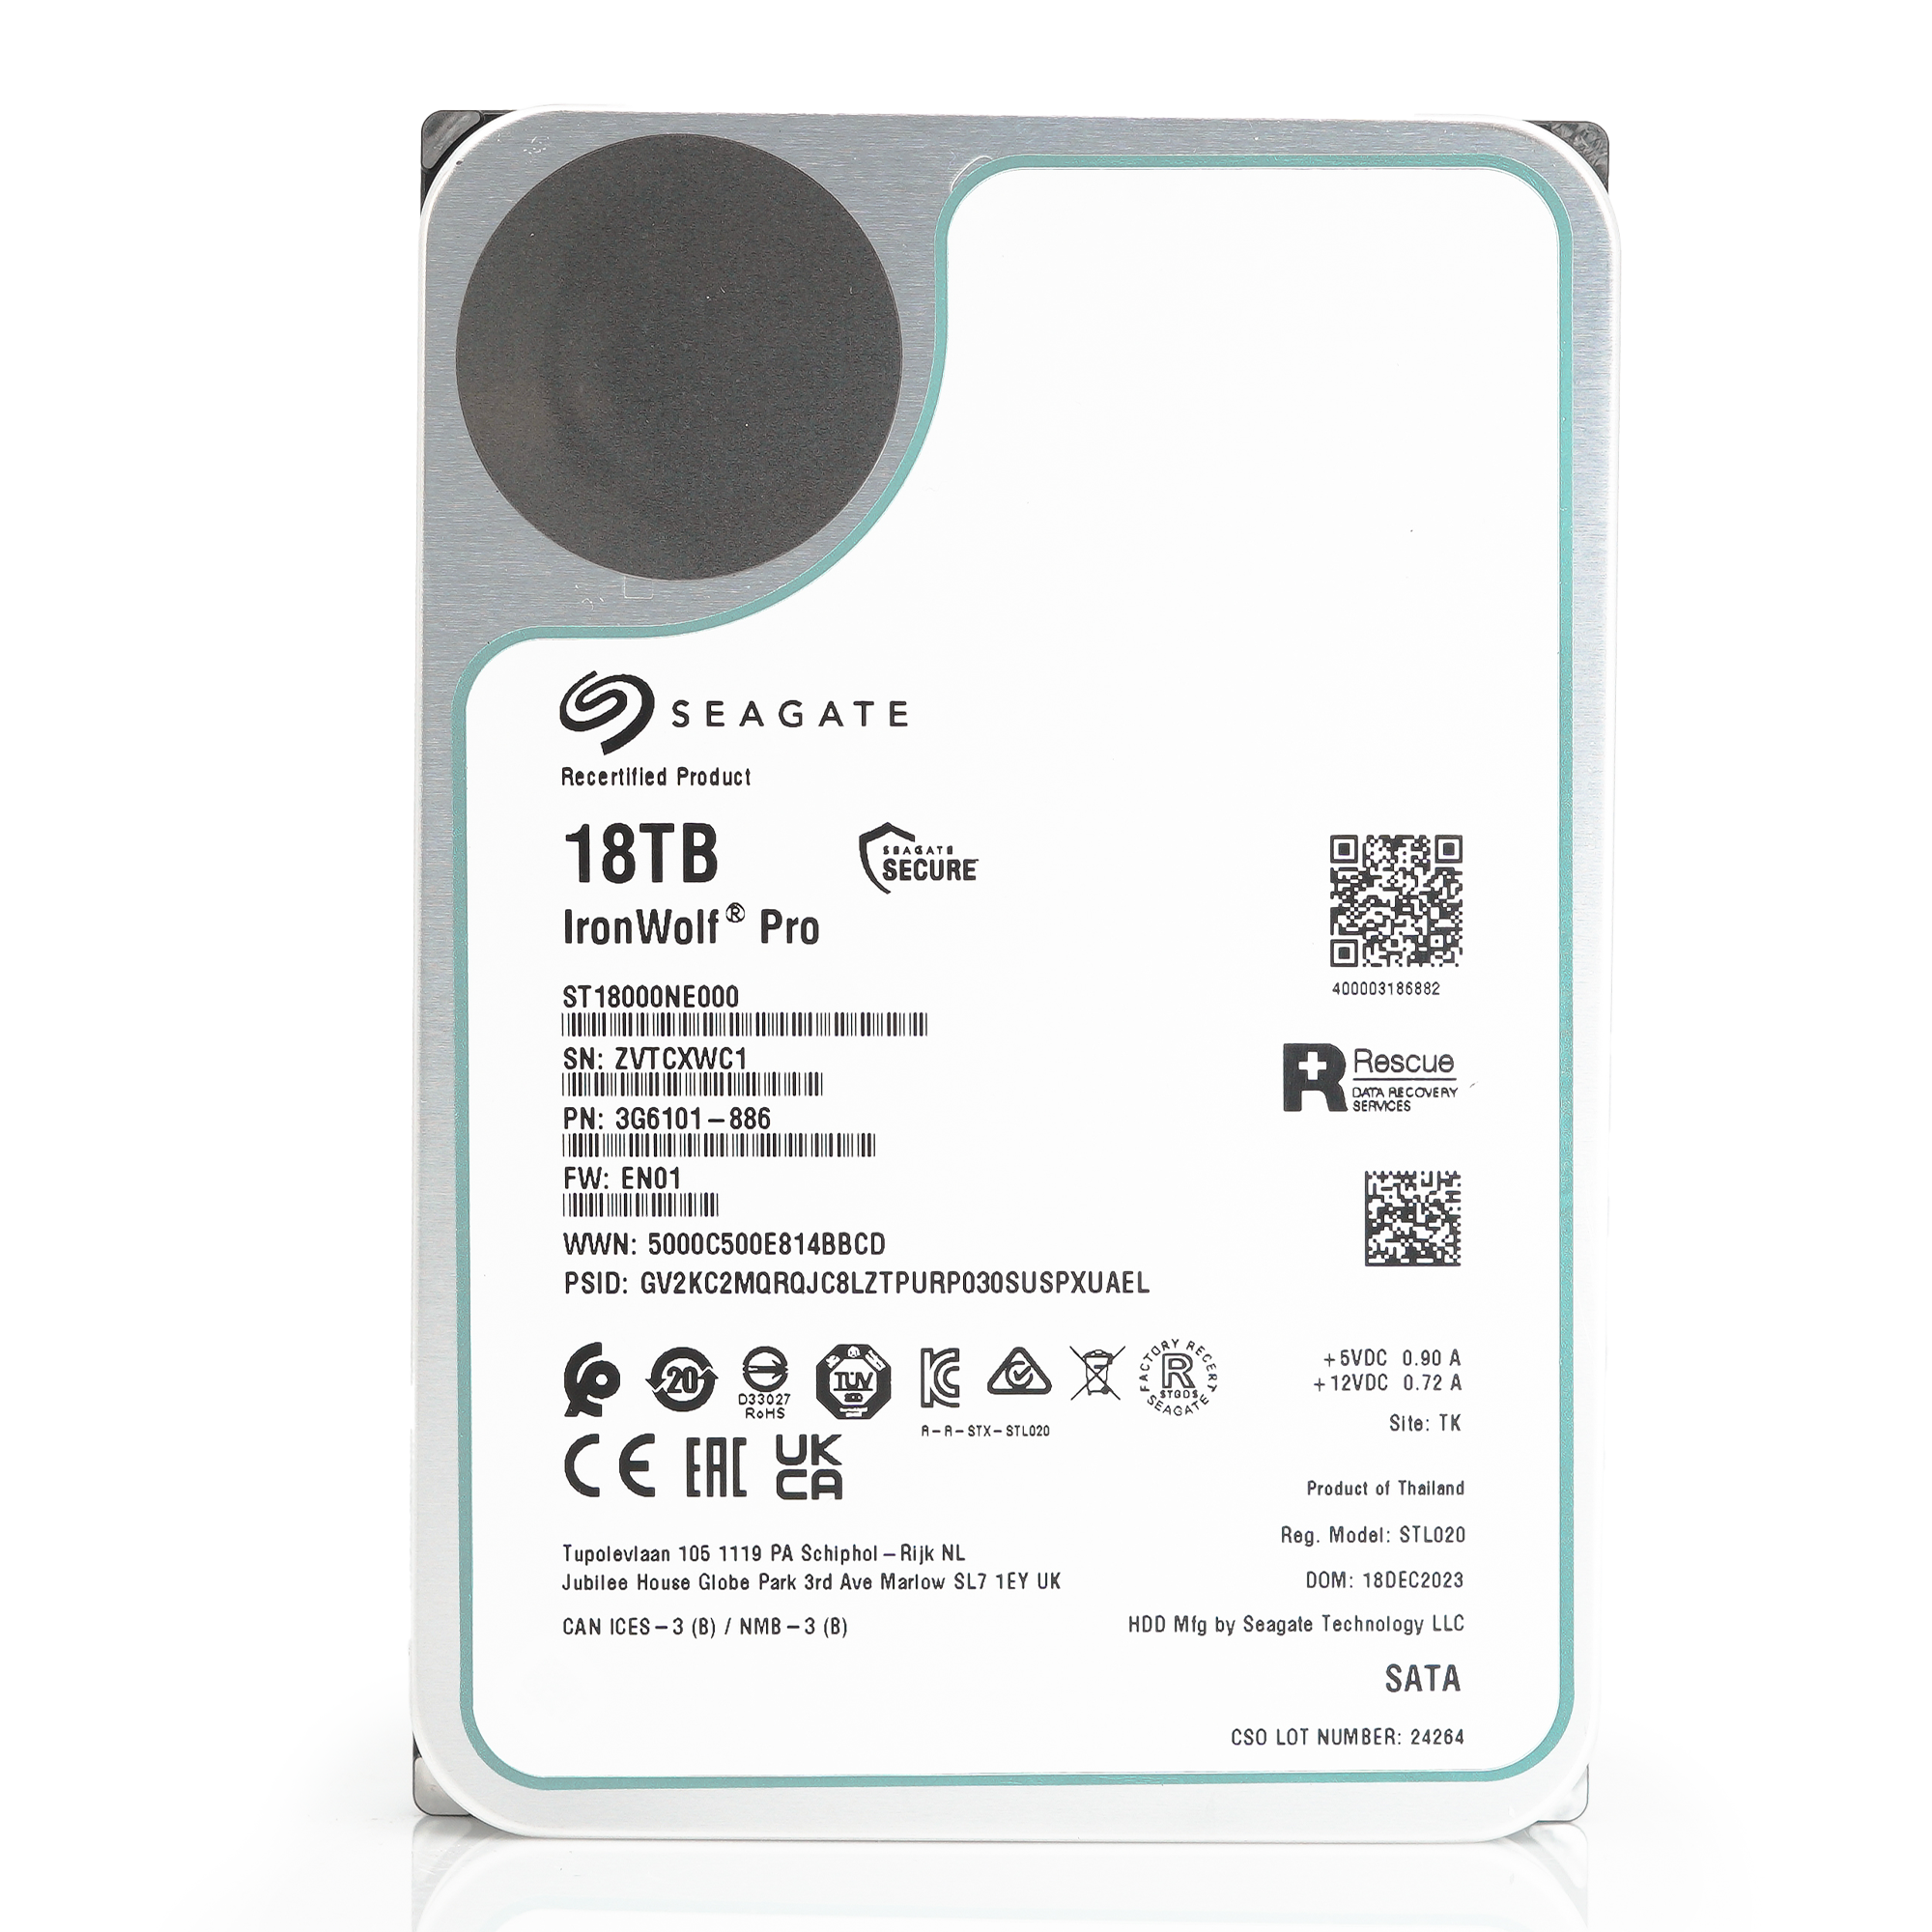 Seagate IronWolf Pro ST18000NE000 18TB 7.2K RPM SATA 6Gb/s 512e 3.5in Recertified Hard Drive - Front View